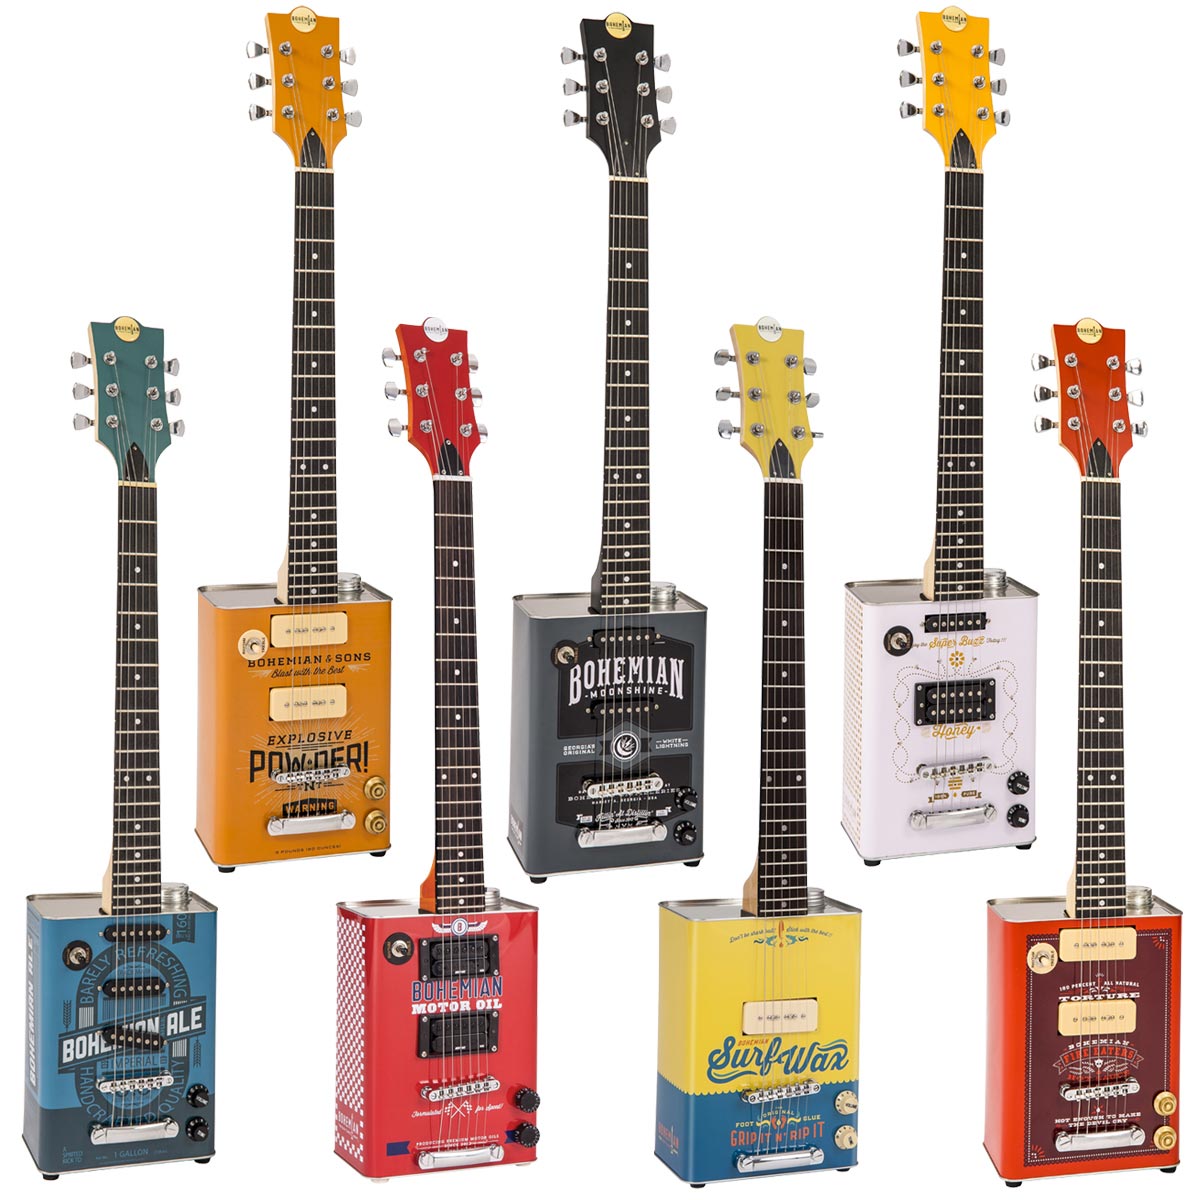 Bohemian Electric Oil-Can Guitars & Ukuleles Now Available With